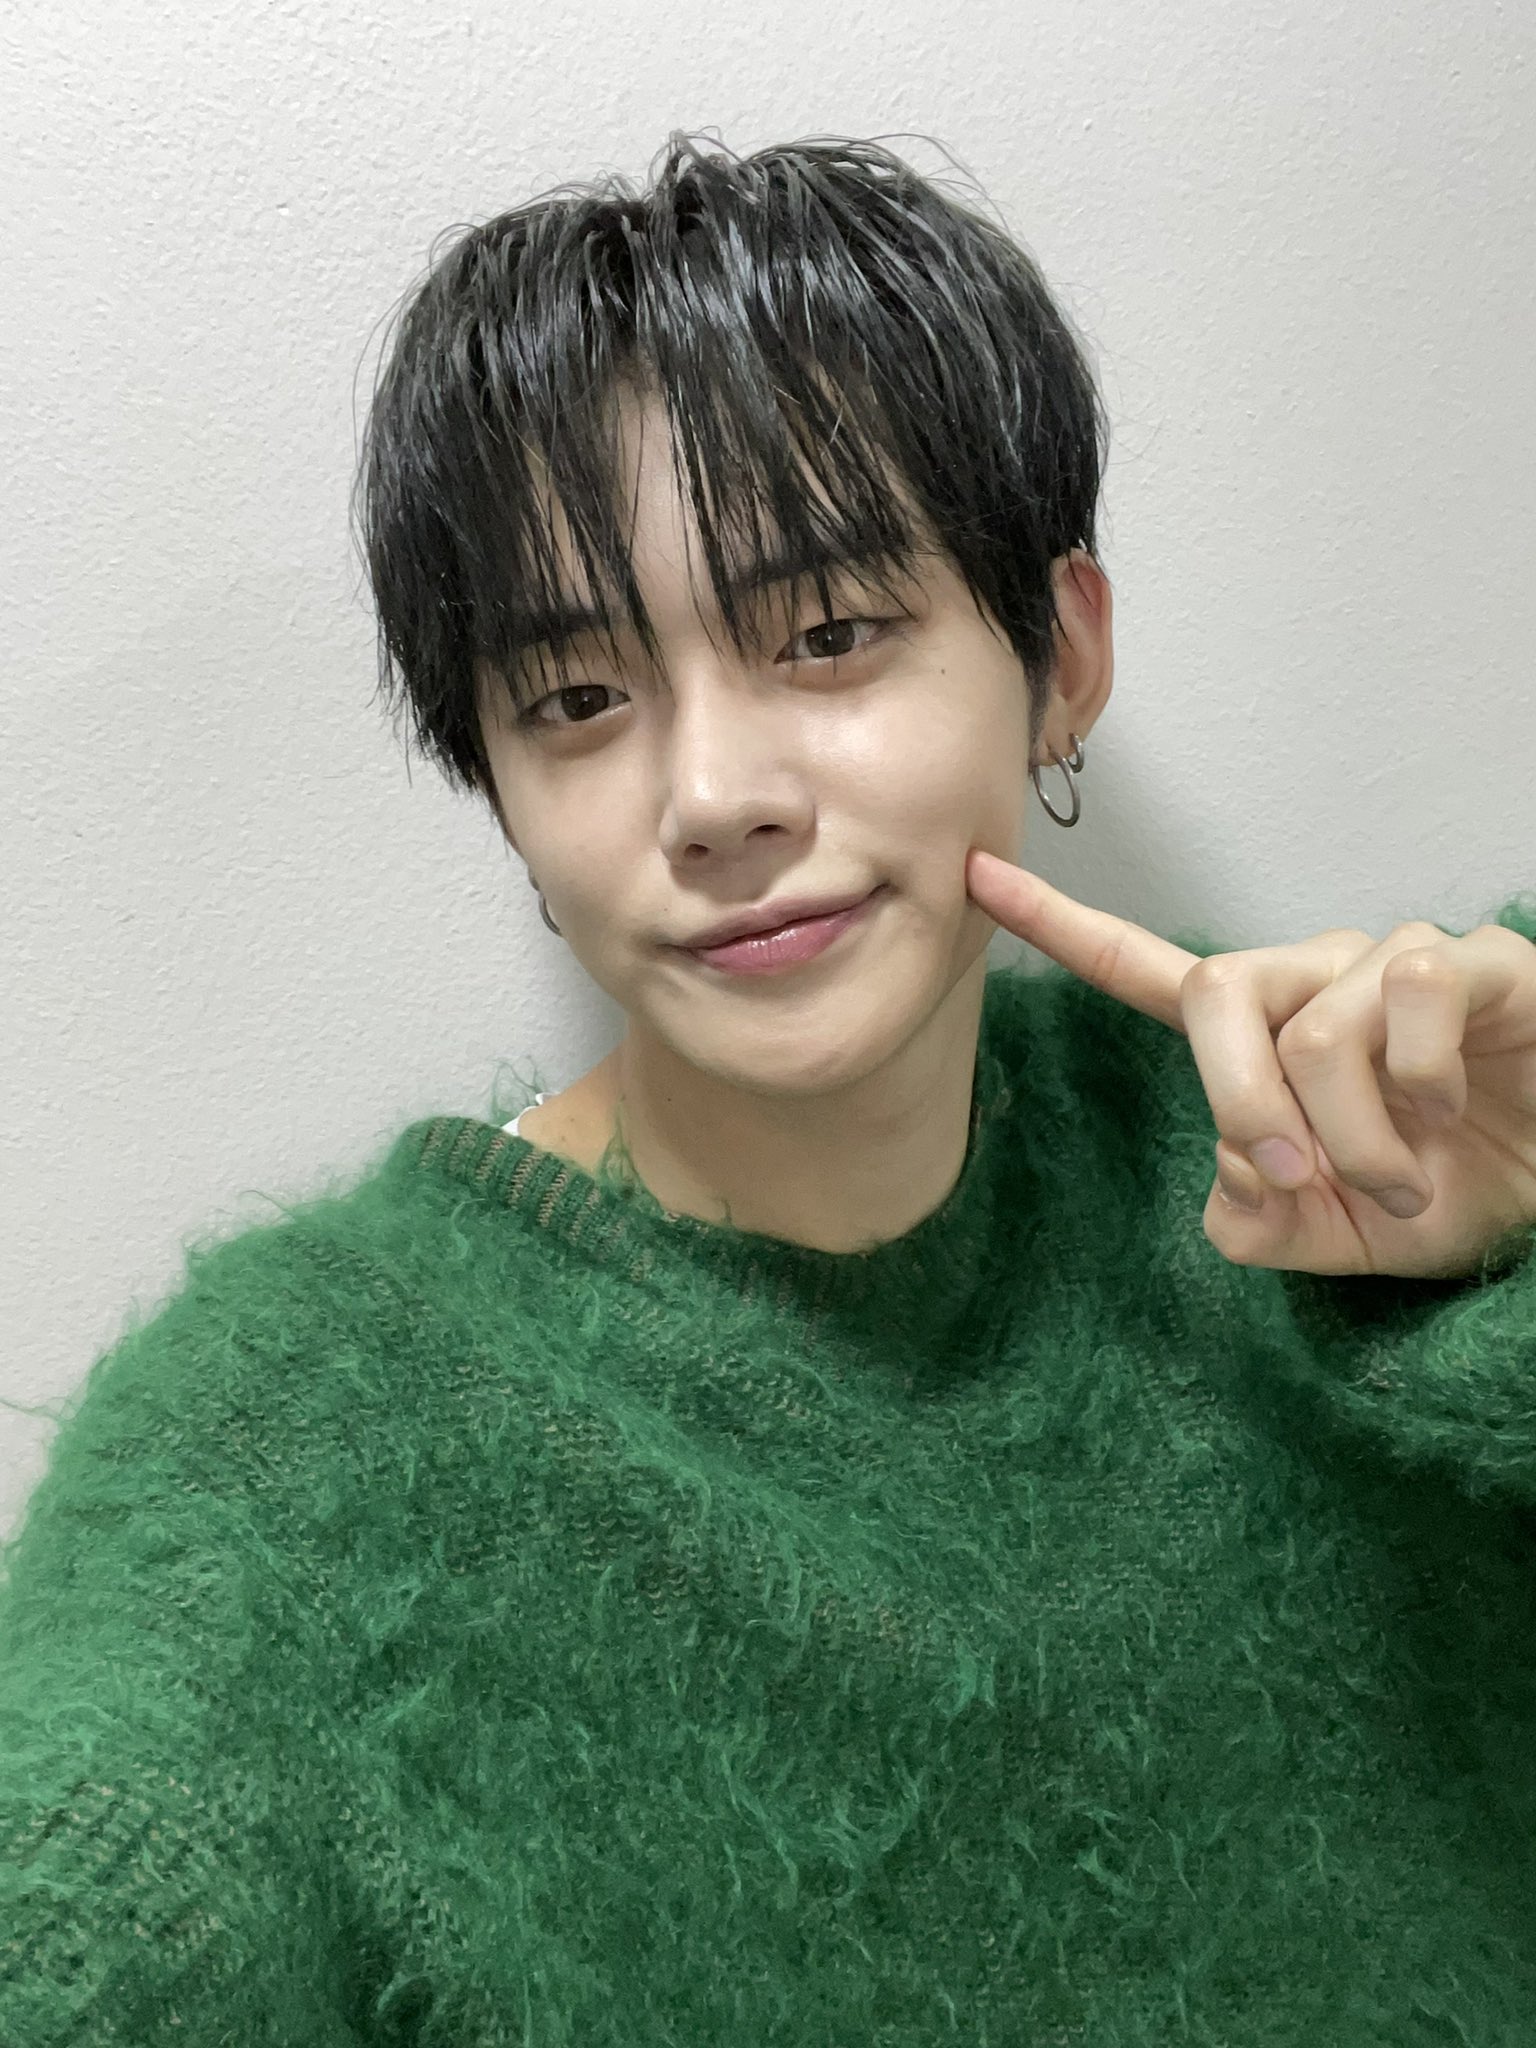 PHOTOS: 6 times TOMORROW X TOGETHER’s Yeonjun looked handsome in various selfies | PINKVILLA